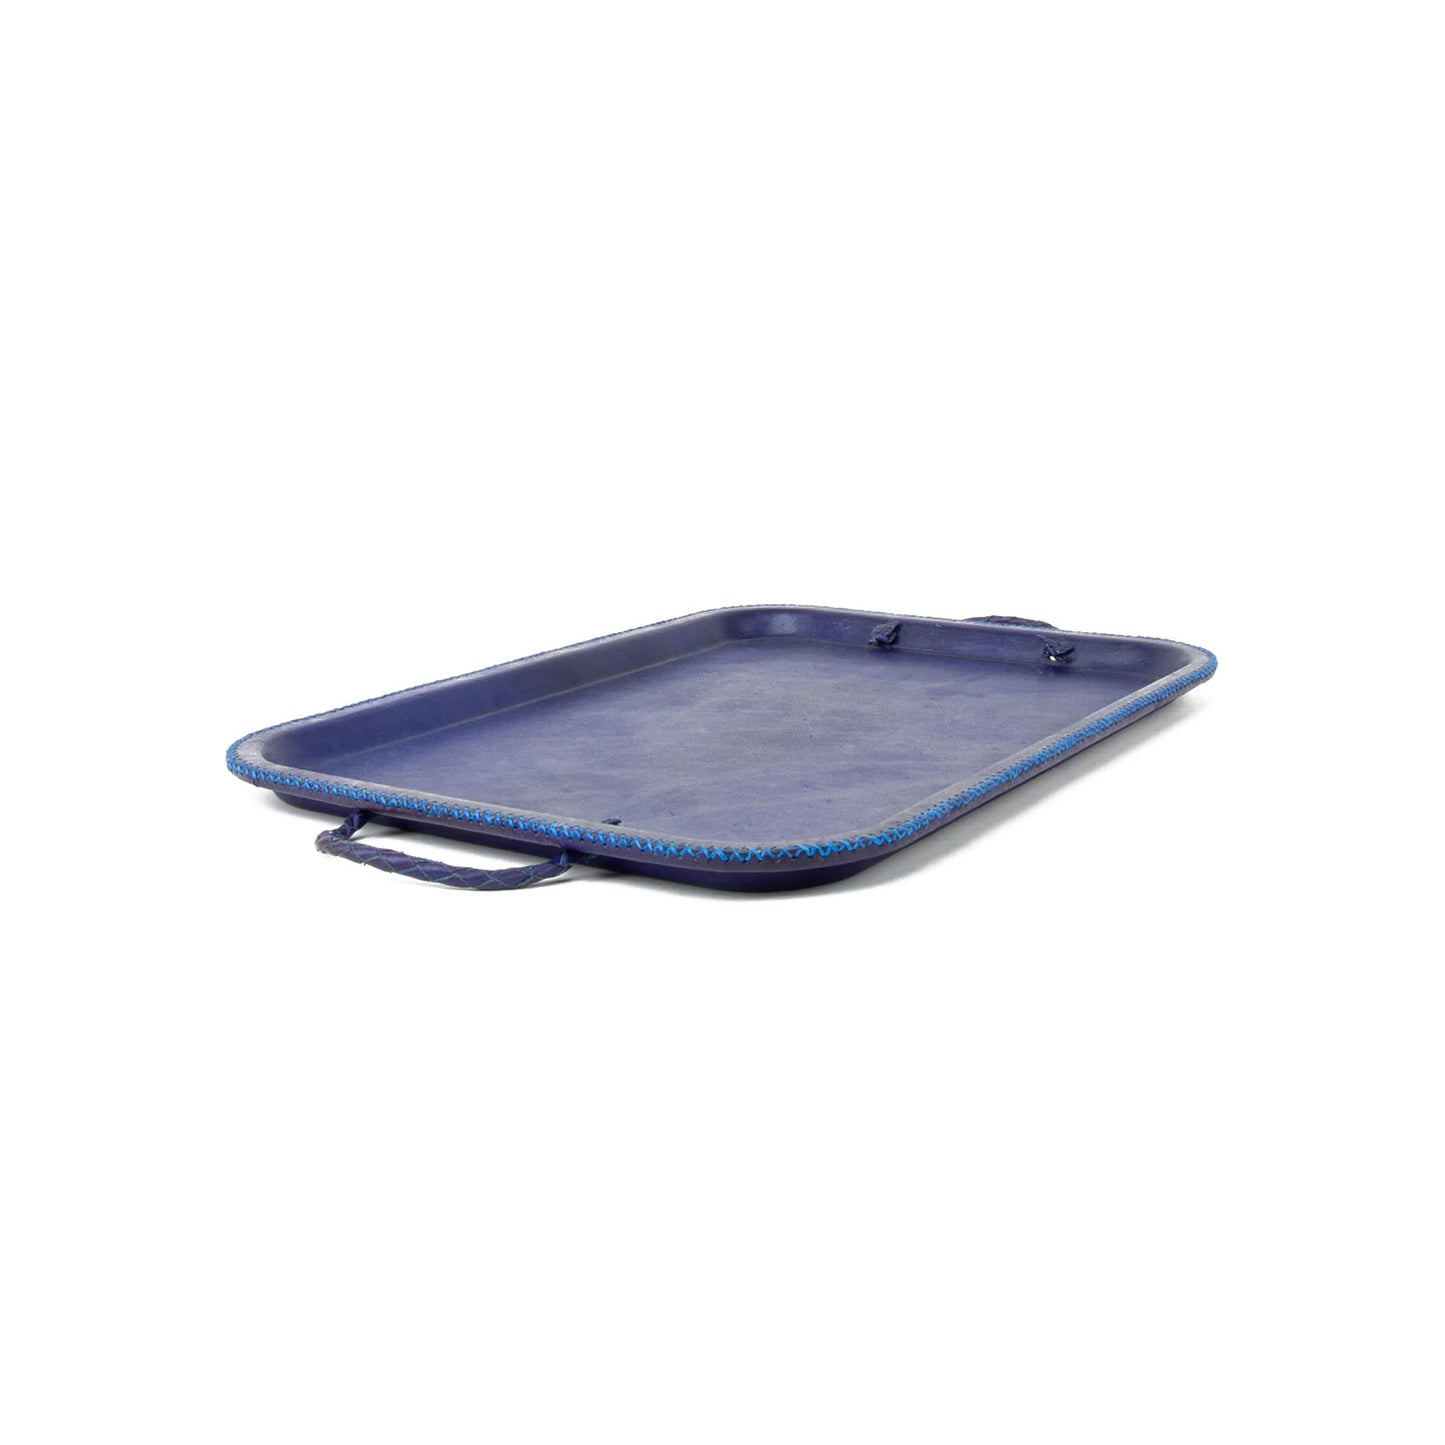 Leather Serving Tray with Braided Handles in Blue